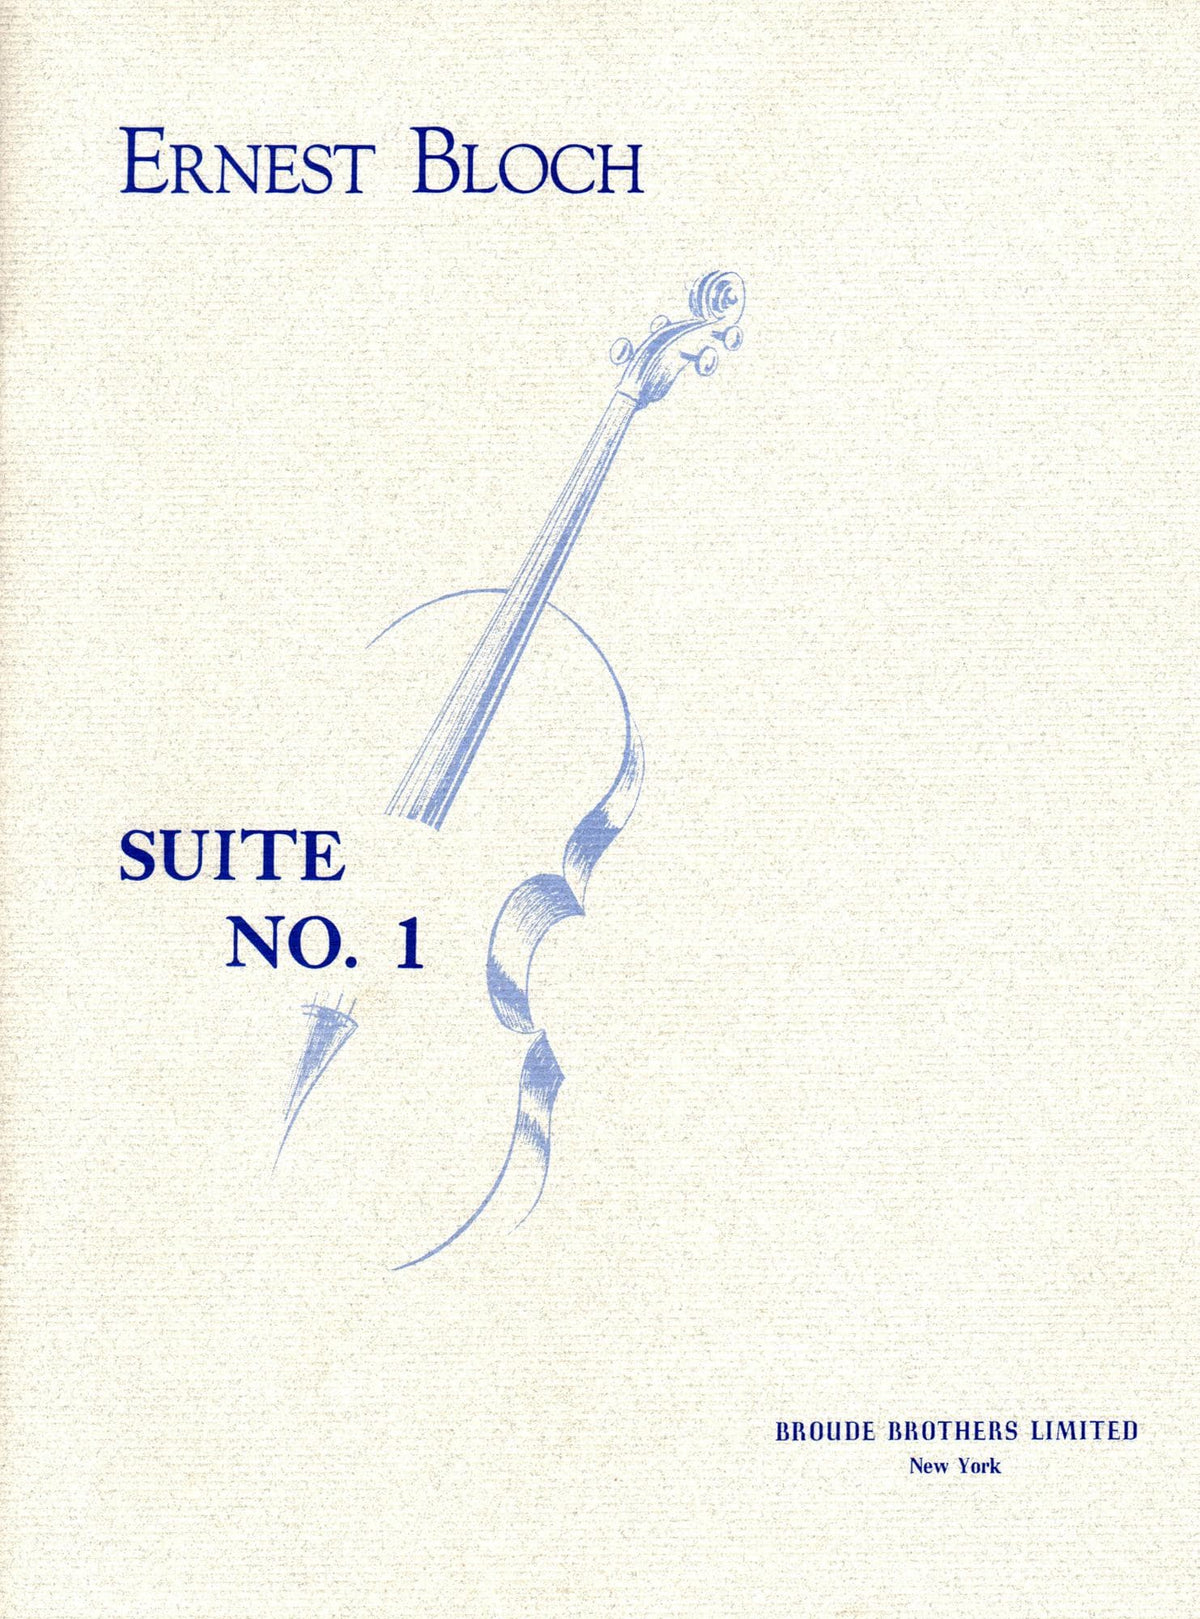 Bloch, Ernest - Suite No 1 for Cello (1956) - Broude Brothers Edition